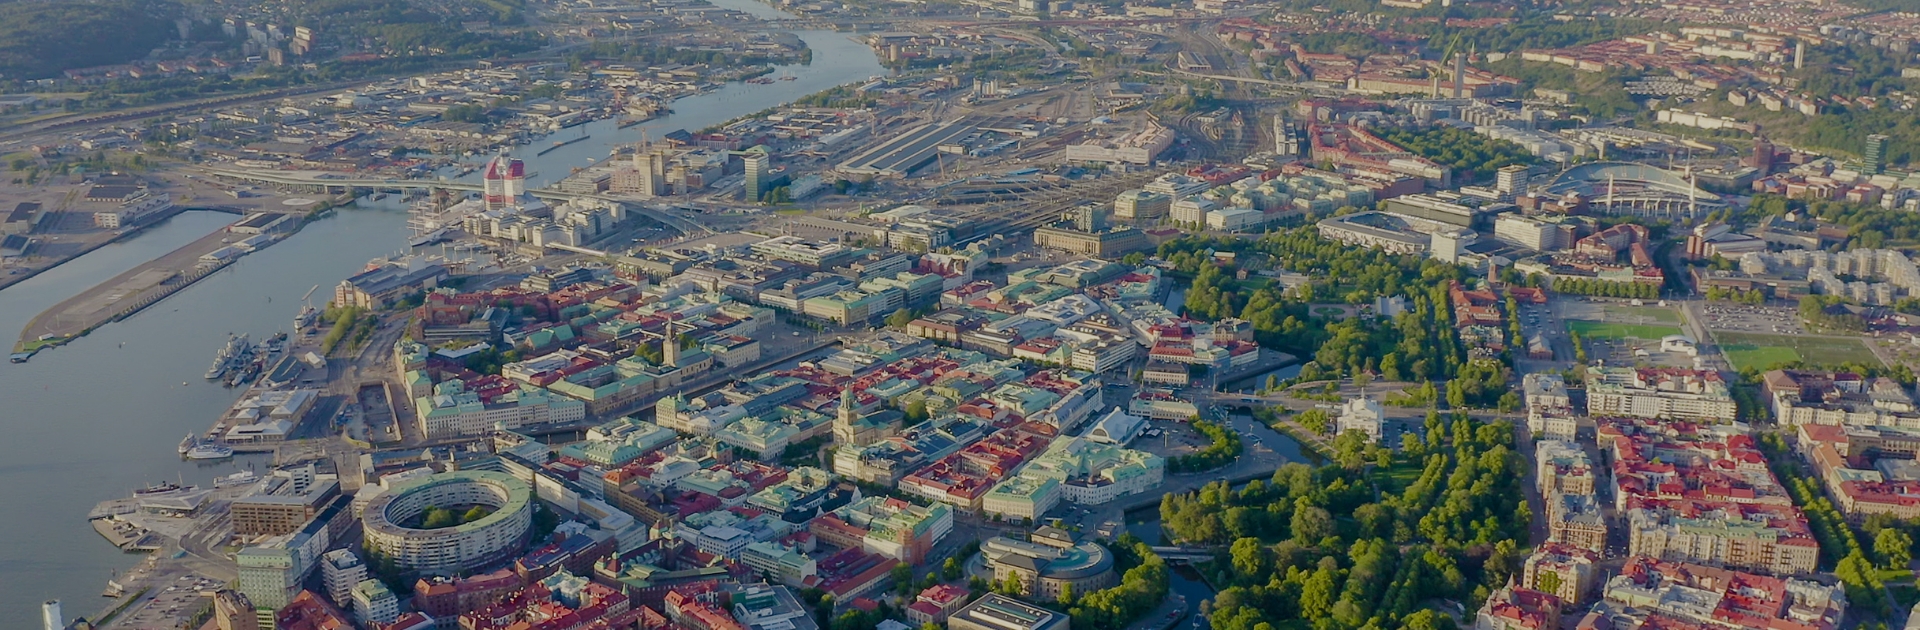 An event participation announcement by SHL Medical titled “SHL Medical to speak and exhibit at 2023 PDA Universe conference in Gothenburg” featuring the drone view of Sweden landscape